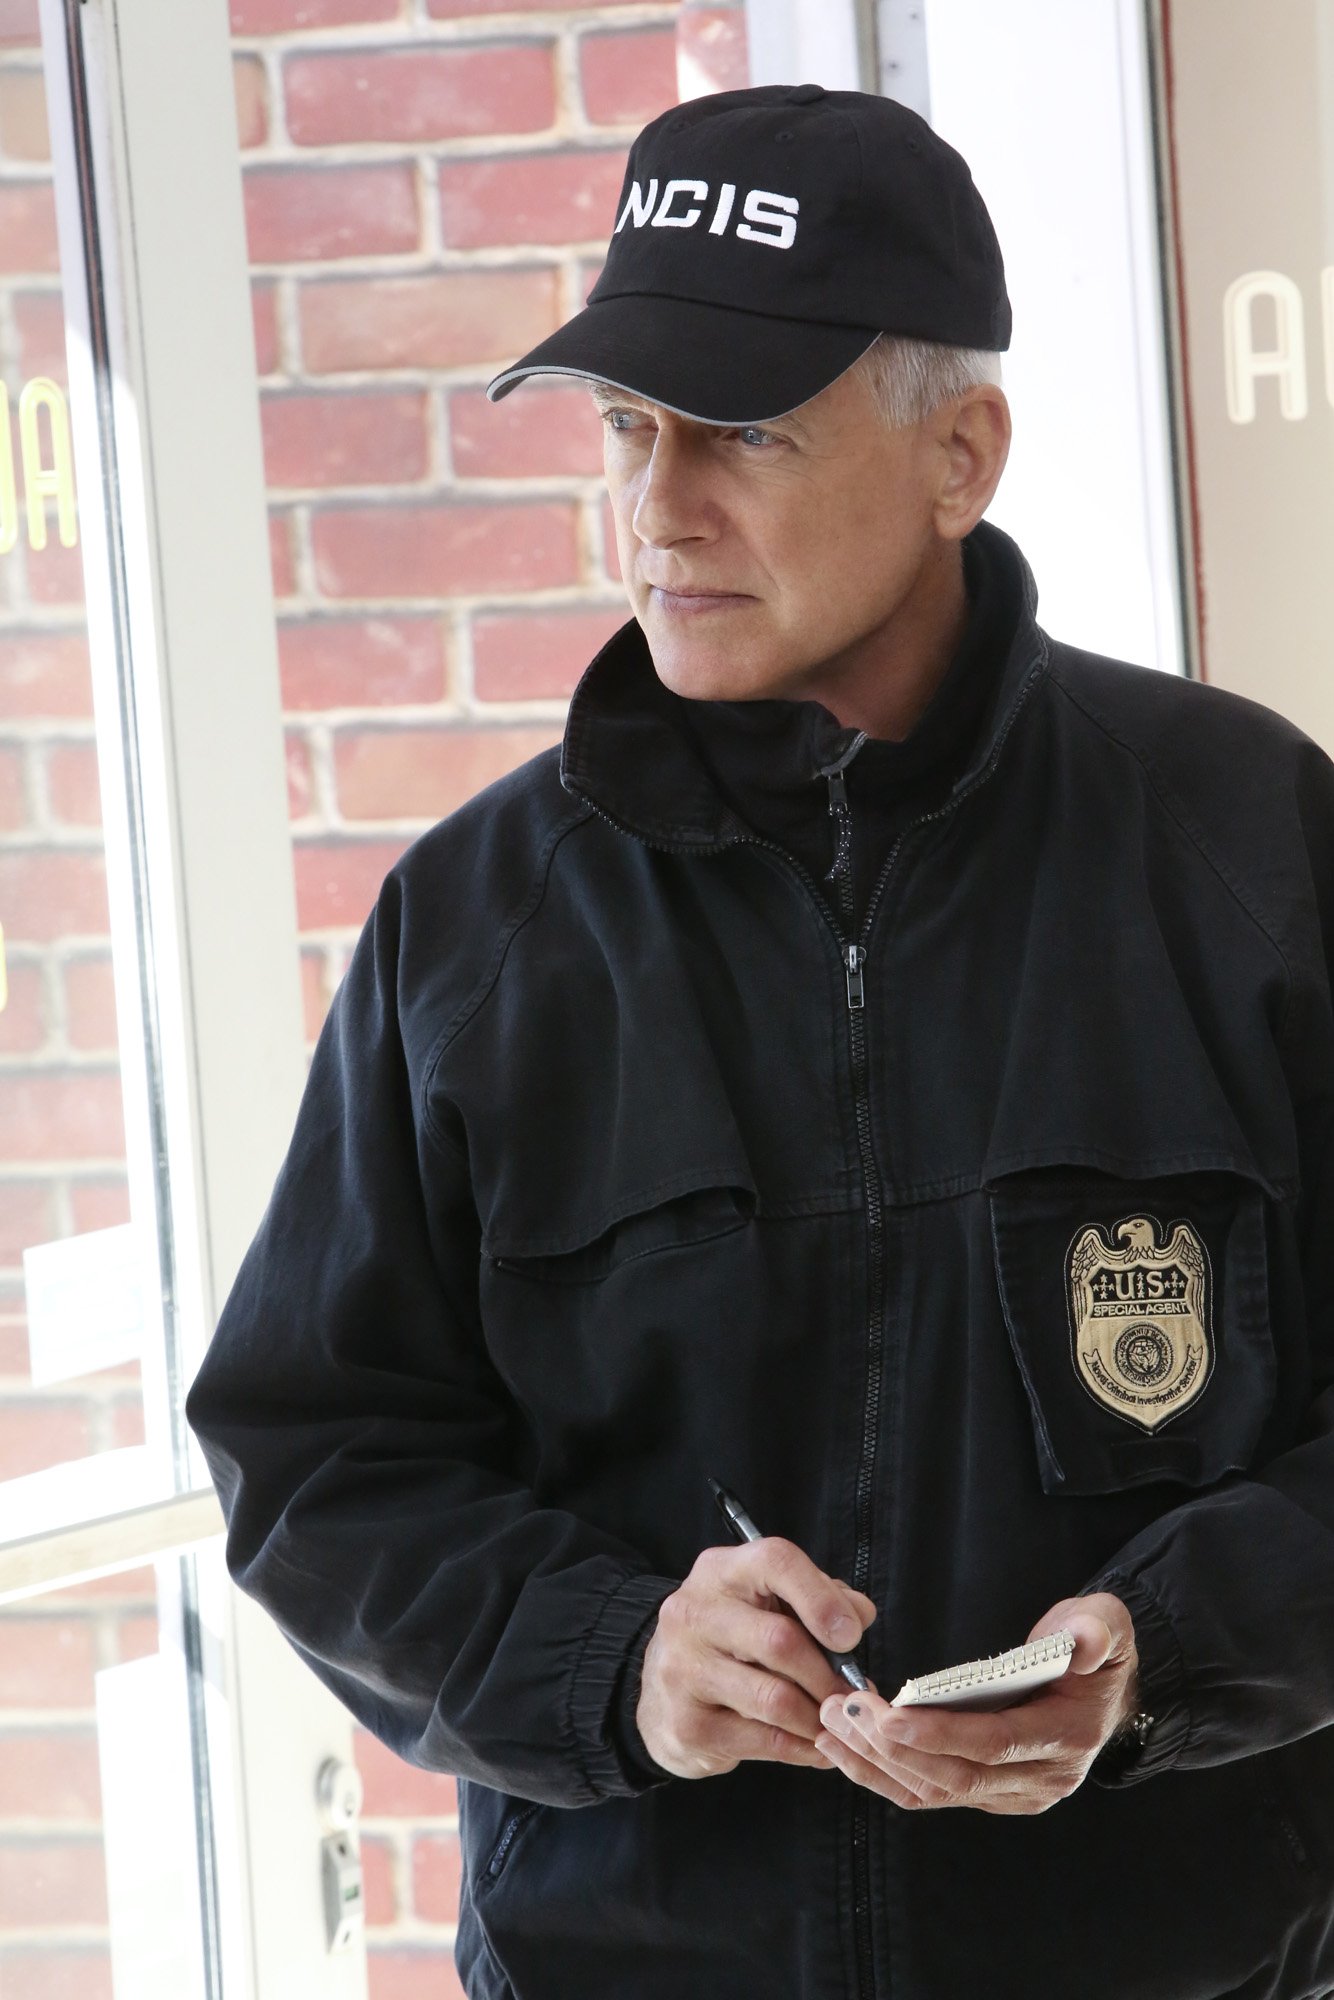 Mark Harmon photographed during a scene on "NCIS" in 2015.  |  Source: Getty Images